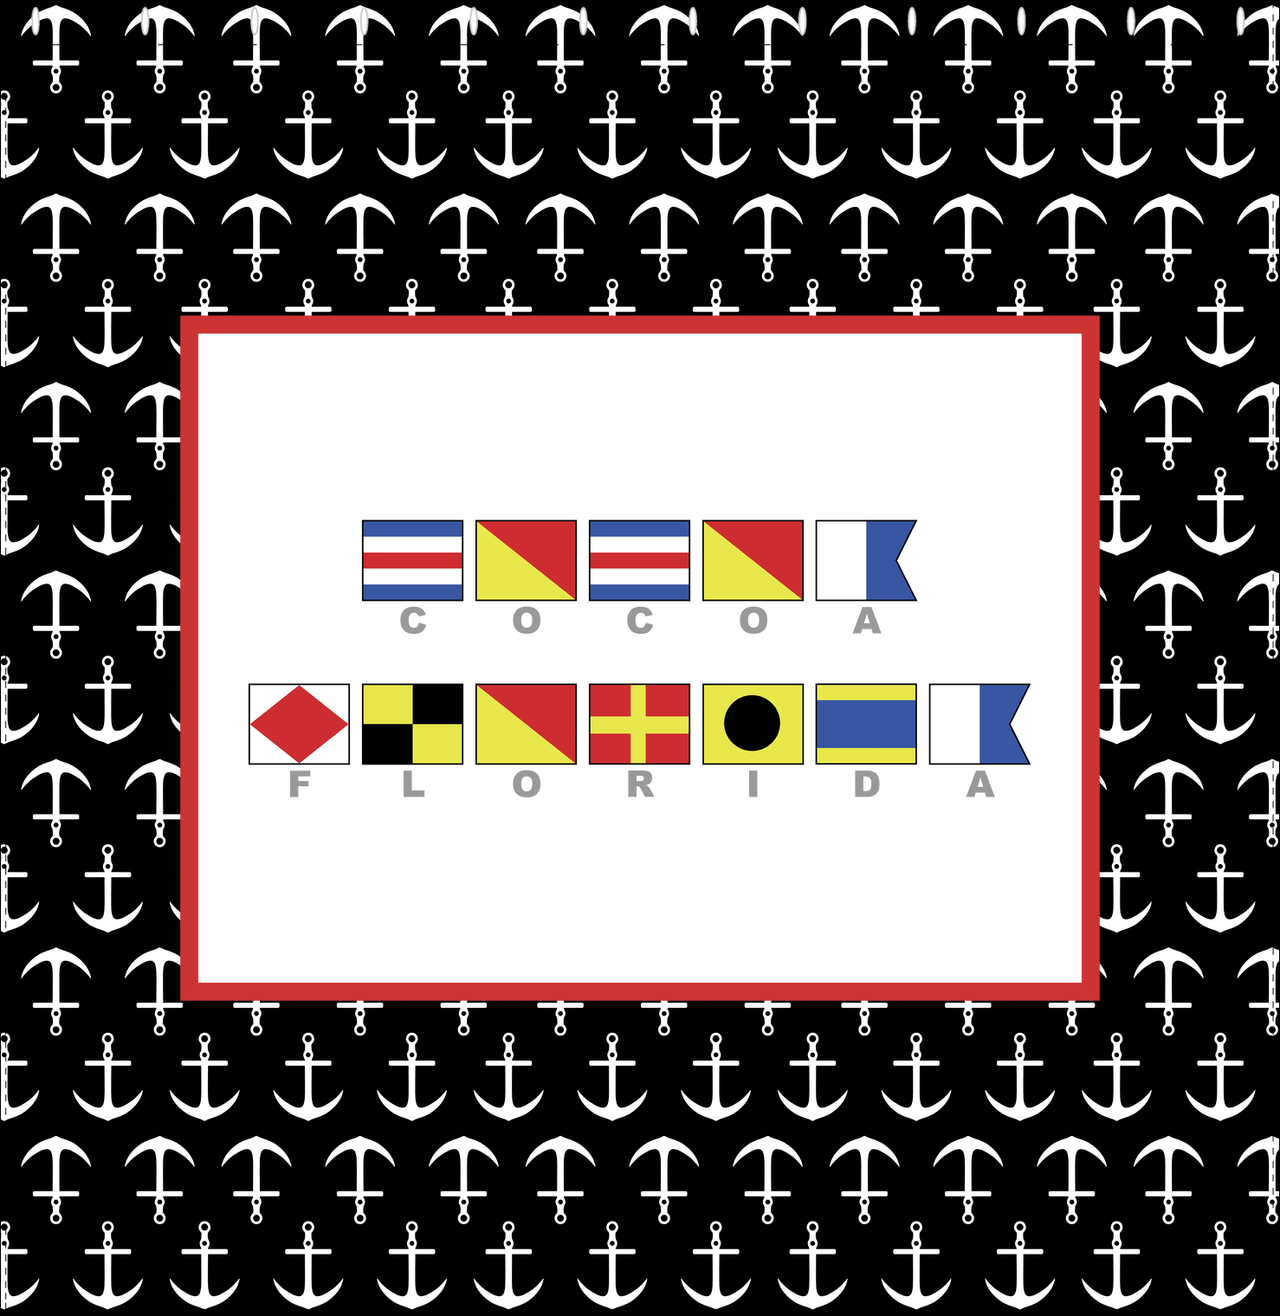 Personalized Nautical Flags Shower Curtain with Anchors - Black and Red - Flags with Grey Letters - Decorate View